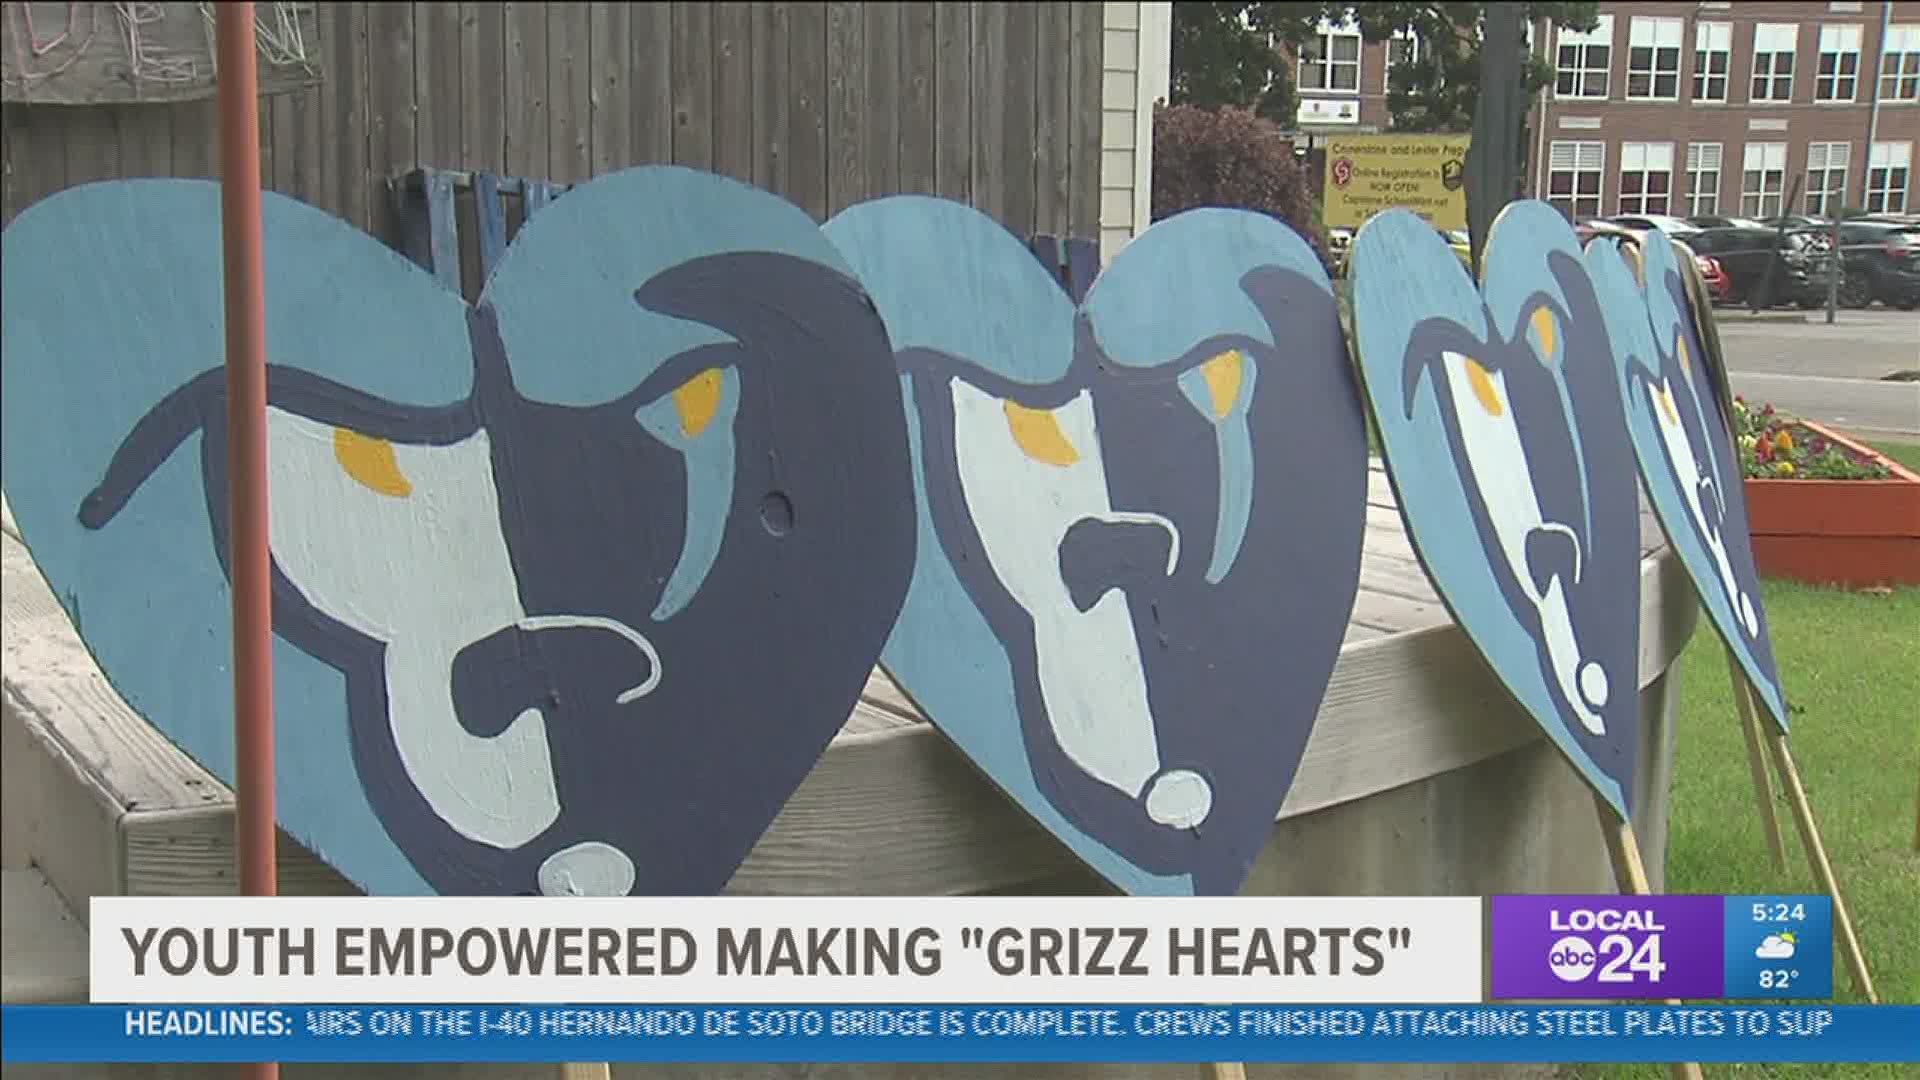 Grizz Hearts started in 2012 at the Carpenter Art Garden by Donte Davis.